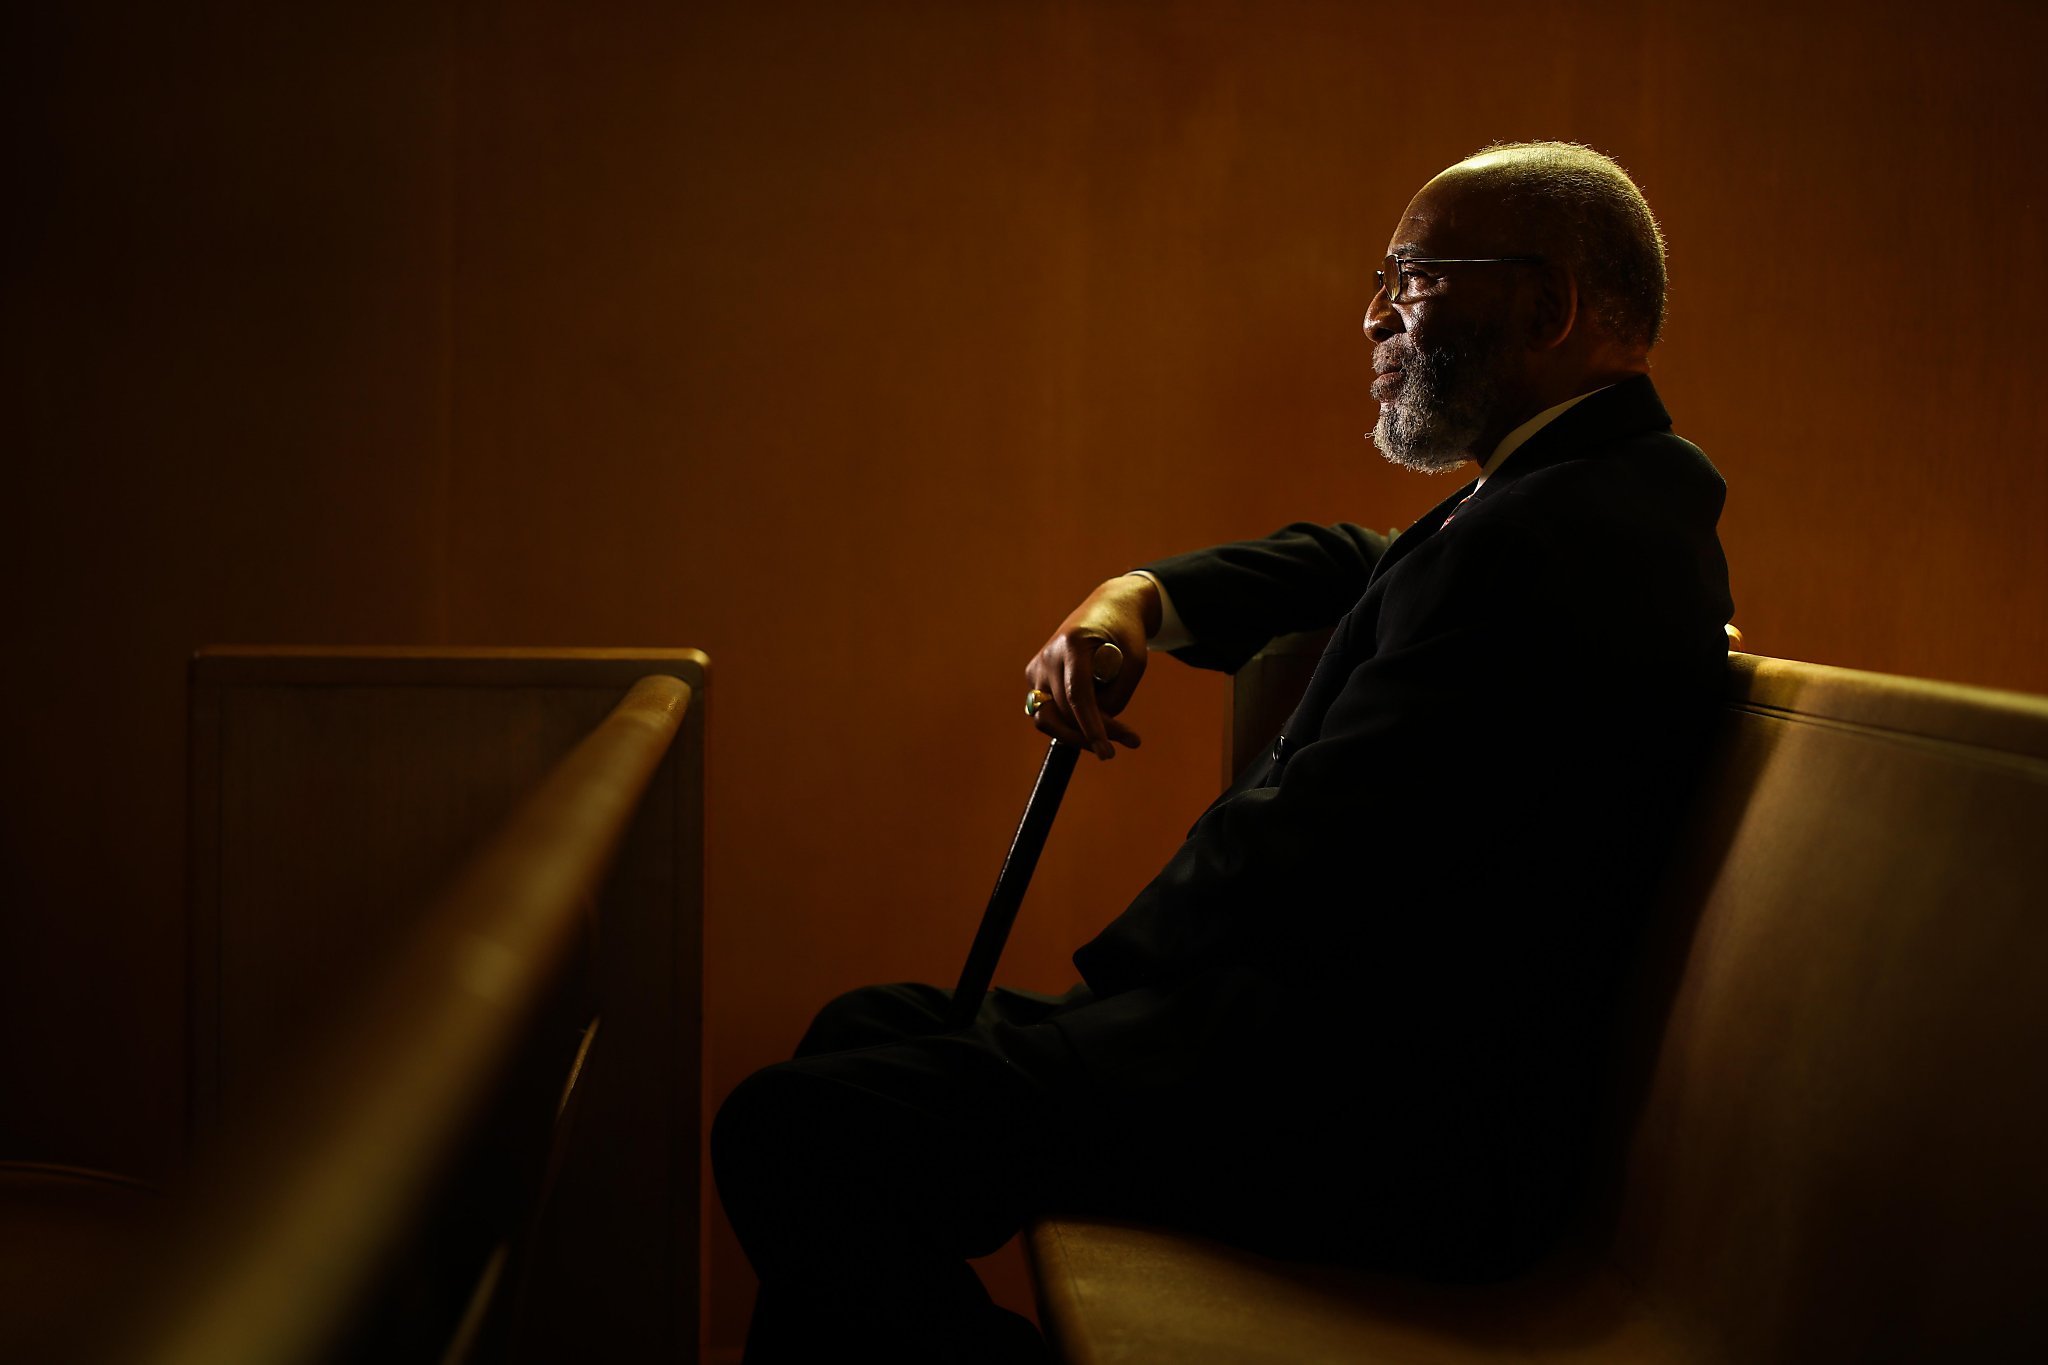 He studied under MLK and fought segregation. Rev. Amos Brown says: ‘San Francisco has been living a lie’